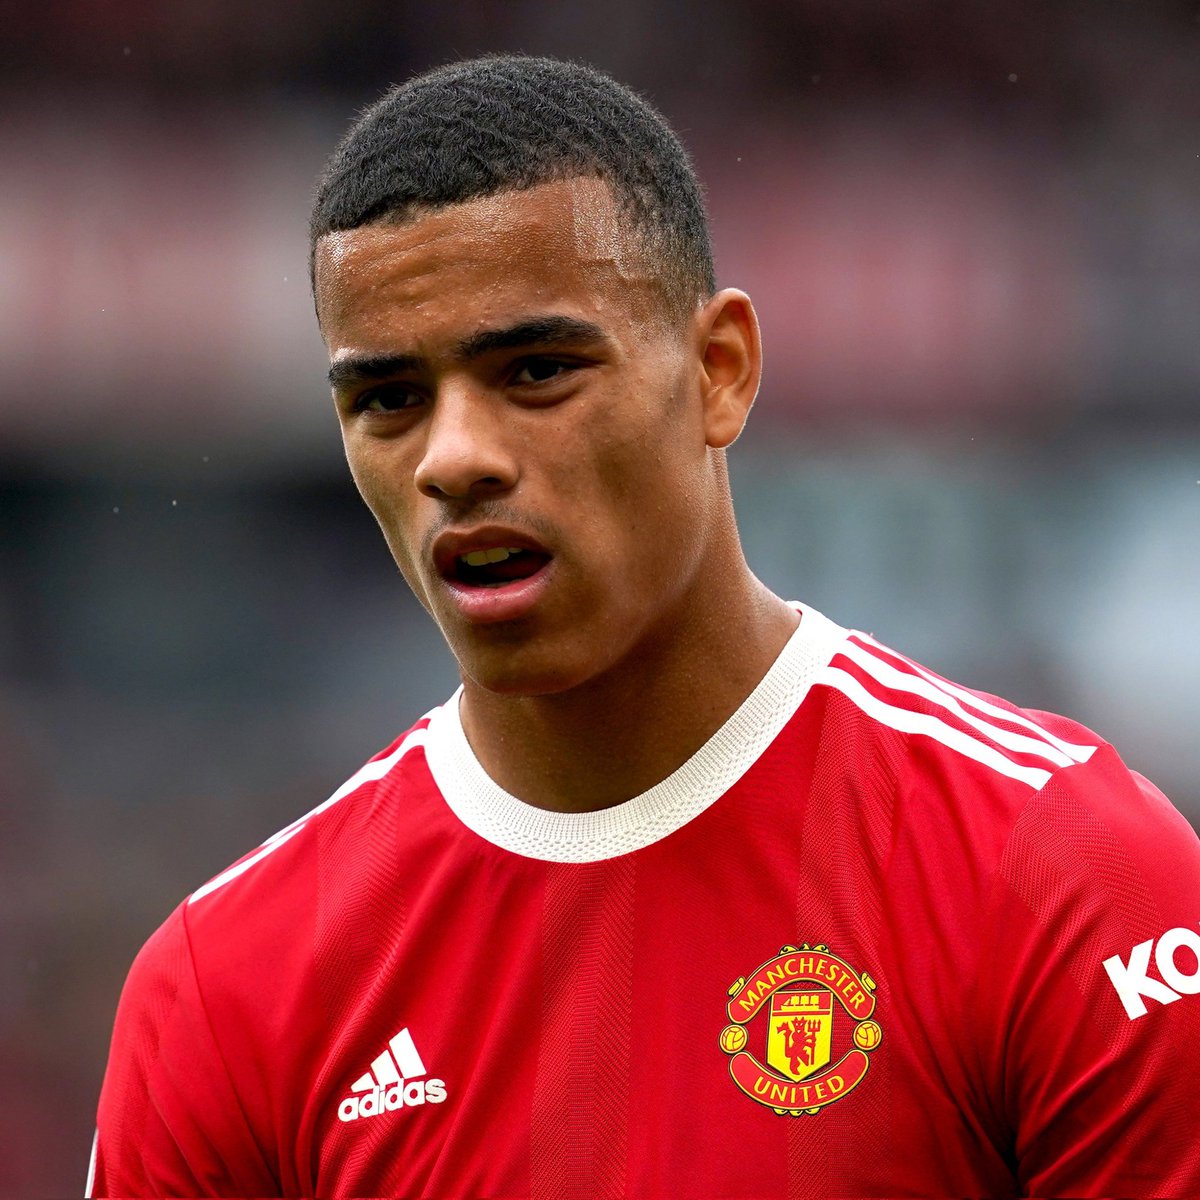 If we all asked for a second chance from God to Make things right, why are you people against Mason Greenwood second chance, many tagged me as rapist concerning my support for Mason Greenwood, how pathetic Yes I'm still saying it, he deserves a second chance #MUFC #Greenwood